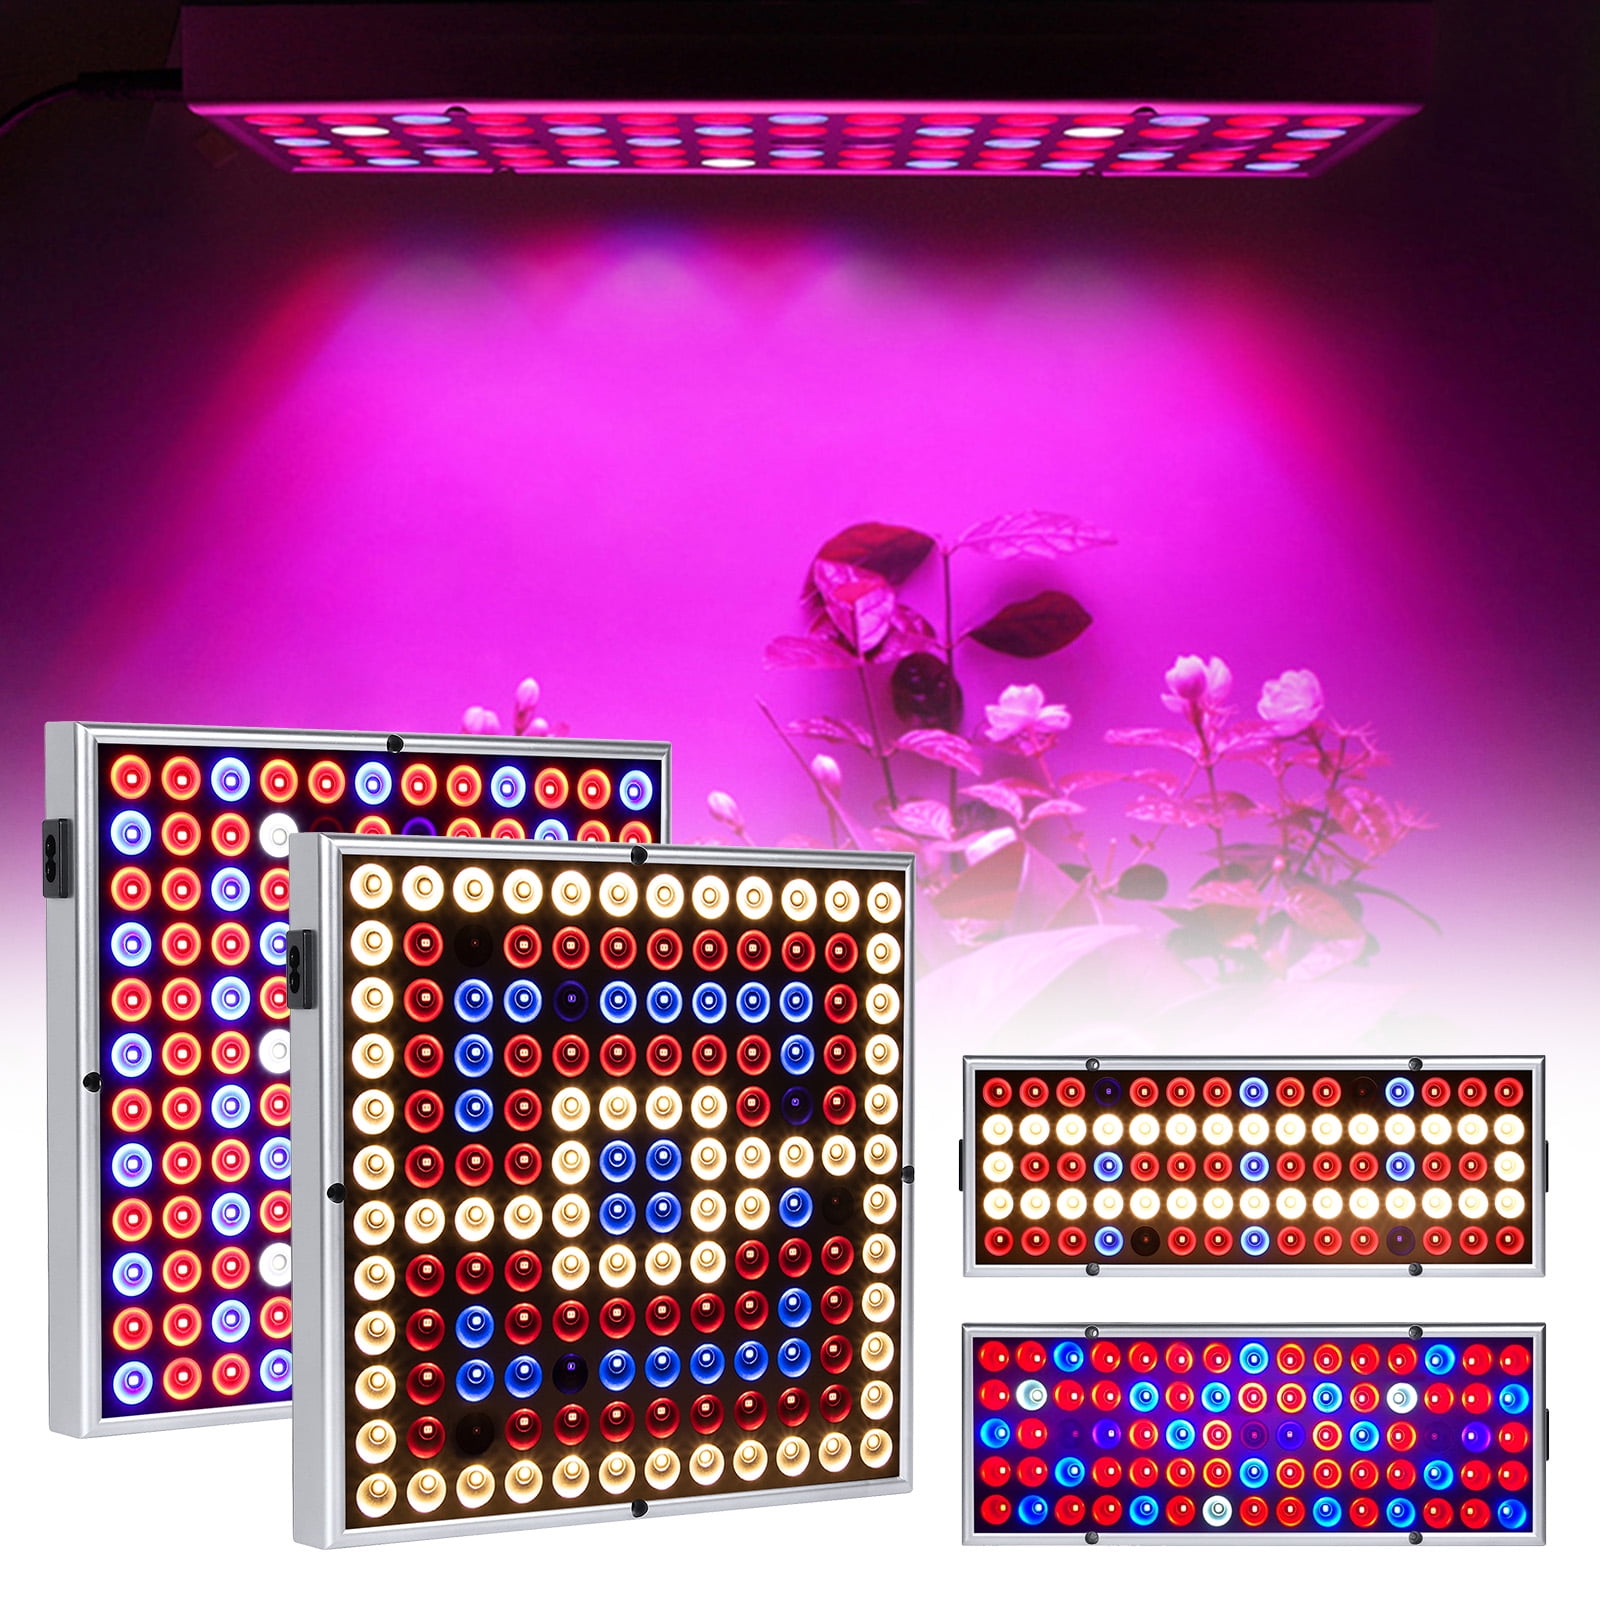 Details about   8000W LED Grow Light Full Spectrum Lamp with IR & UV for Indoor Plant Flower Vag 